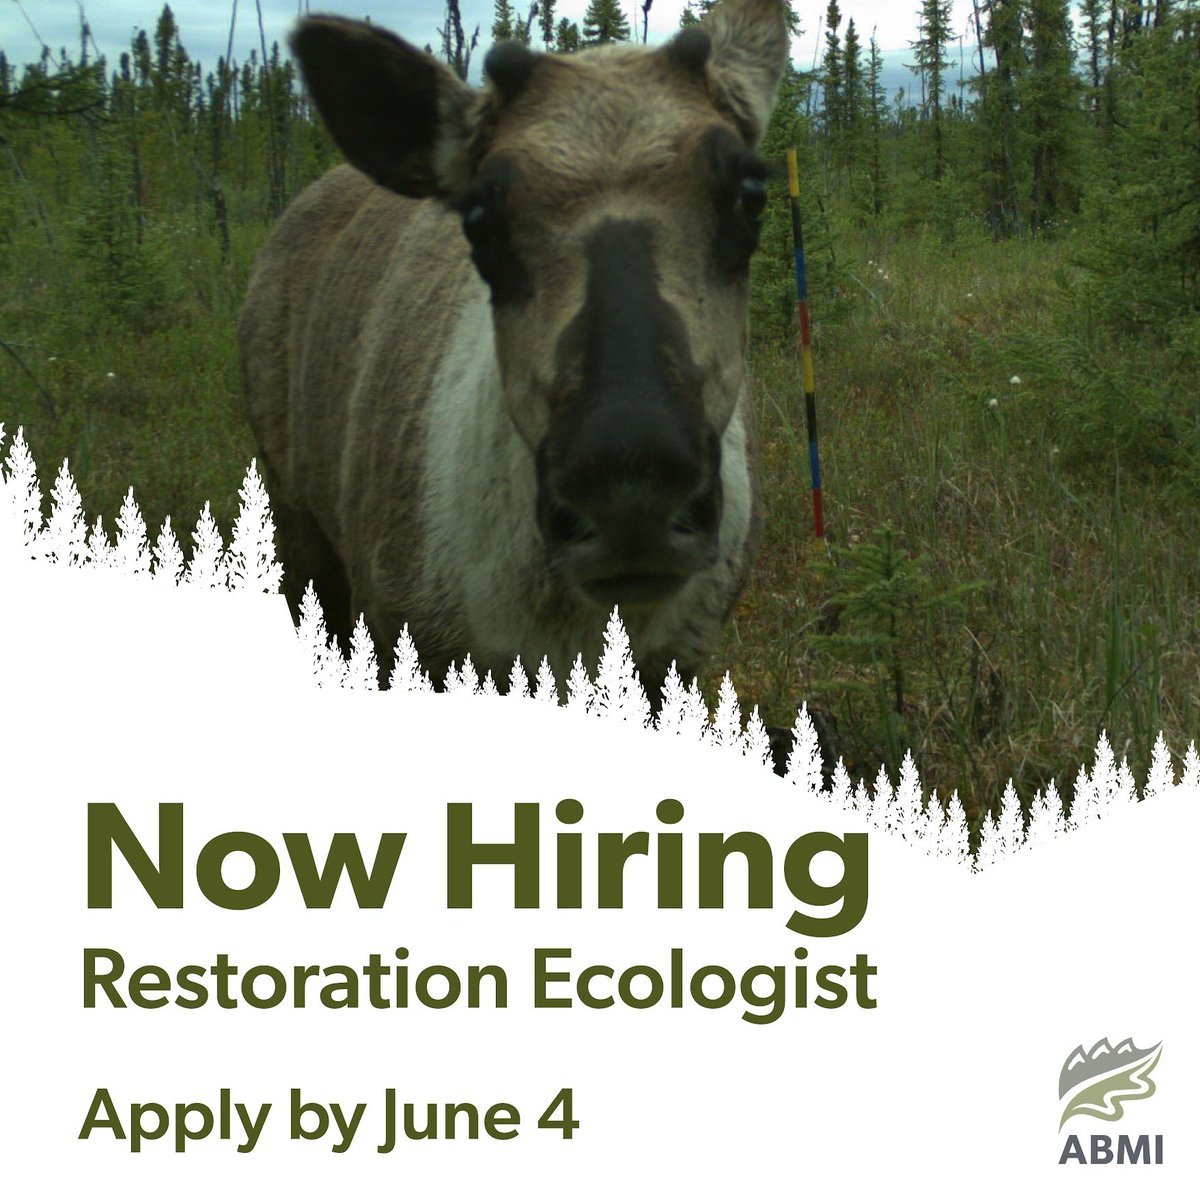 I am SUPER excited to announce that we are hiring a Restoration Ecologist! Apply to work with our team to develop & implement our restoration monitoring & testing programs! Help drive positive change and continual learning. abmi.ca/home/careers/c…